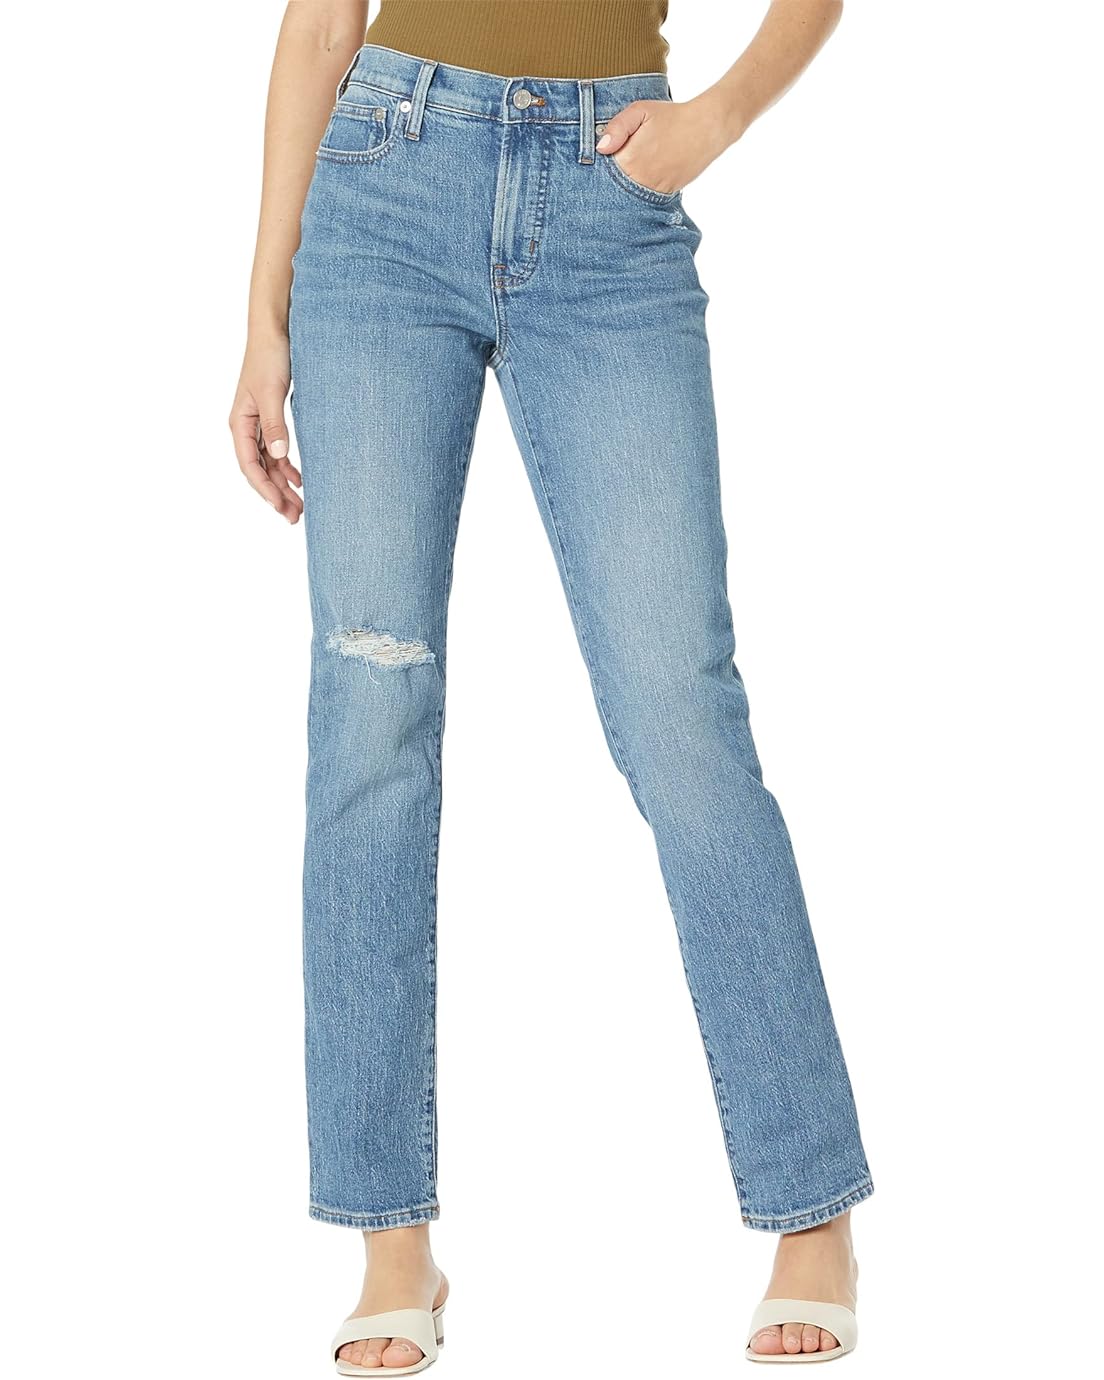 Madewell The Tall Mid-Rise Perfect Vintage Jean in Ainsdale Wash: Knee-Rip Edition